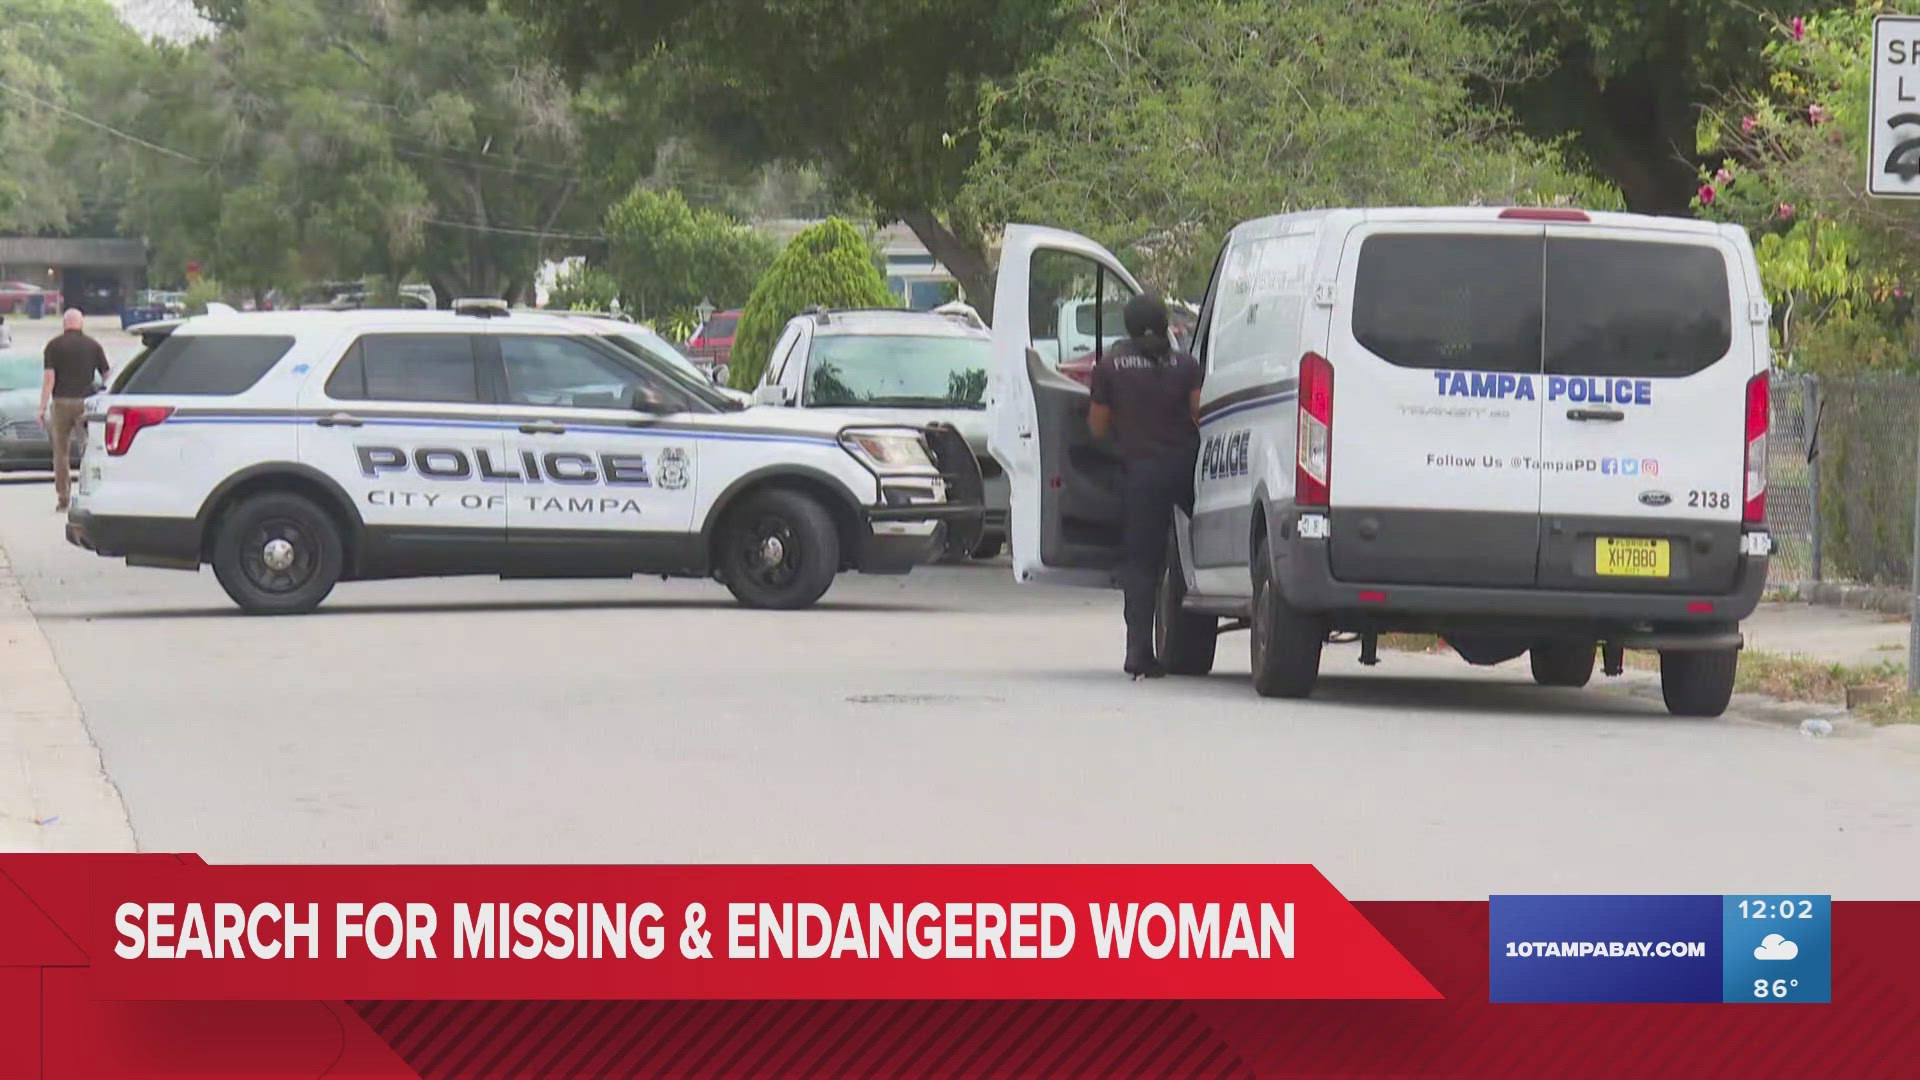 Officials say the man is connected to a now-deactivated Amber Alert for a 9-year-old girl, but that they are "deeply concerned" for the missing Tampa woman's safety.